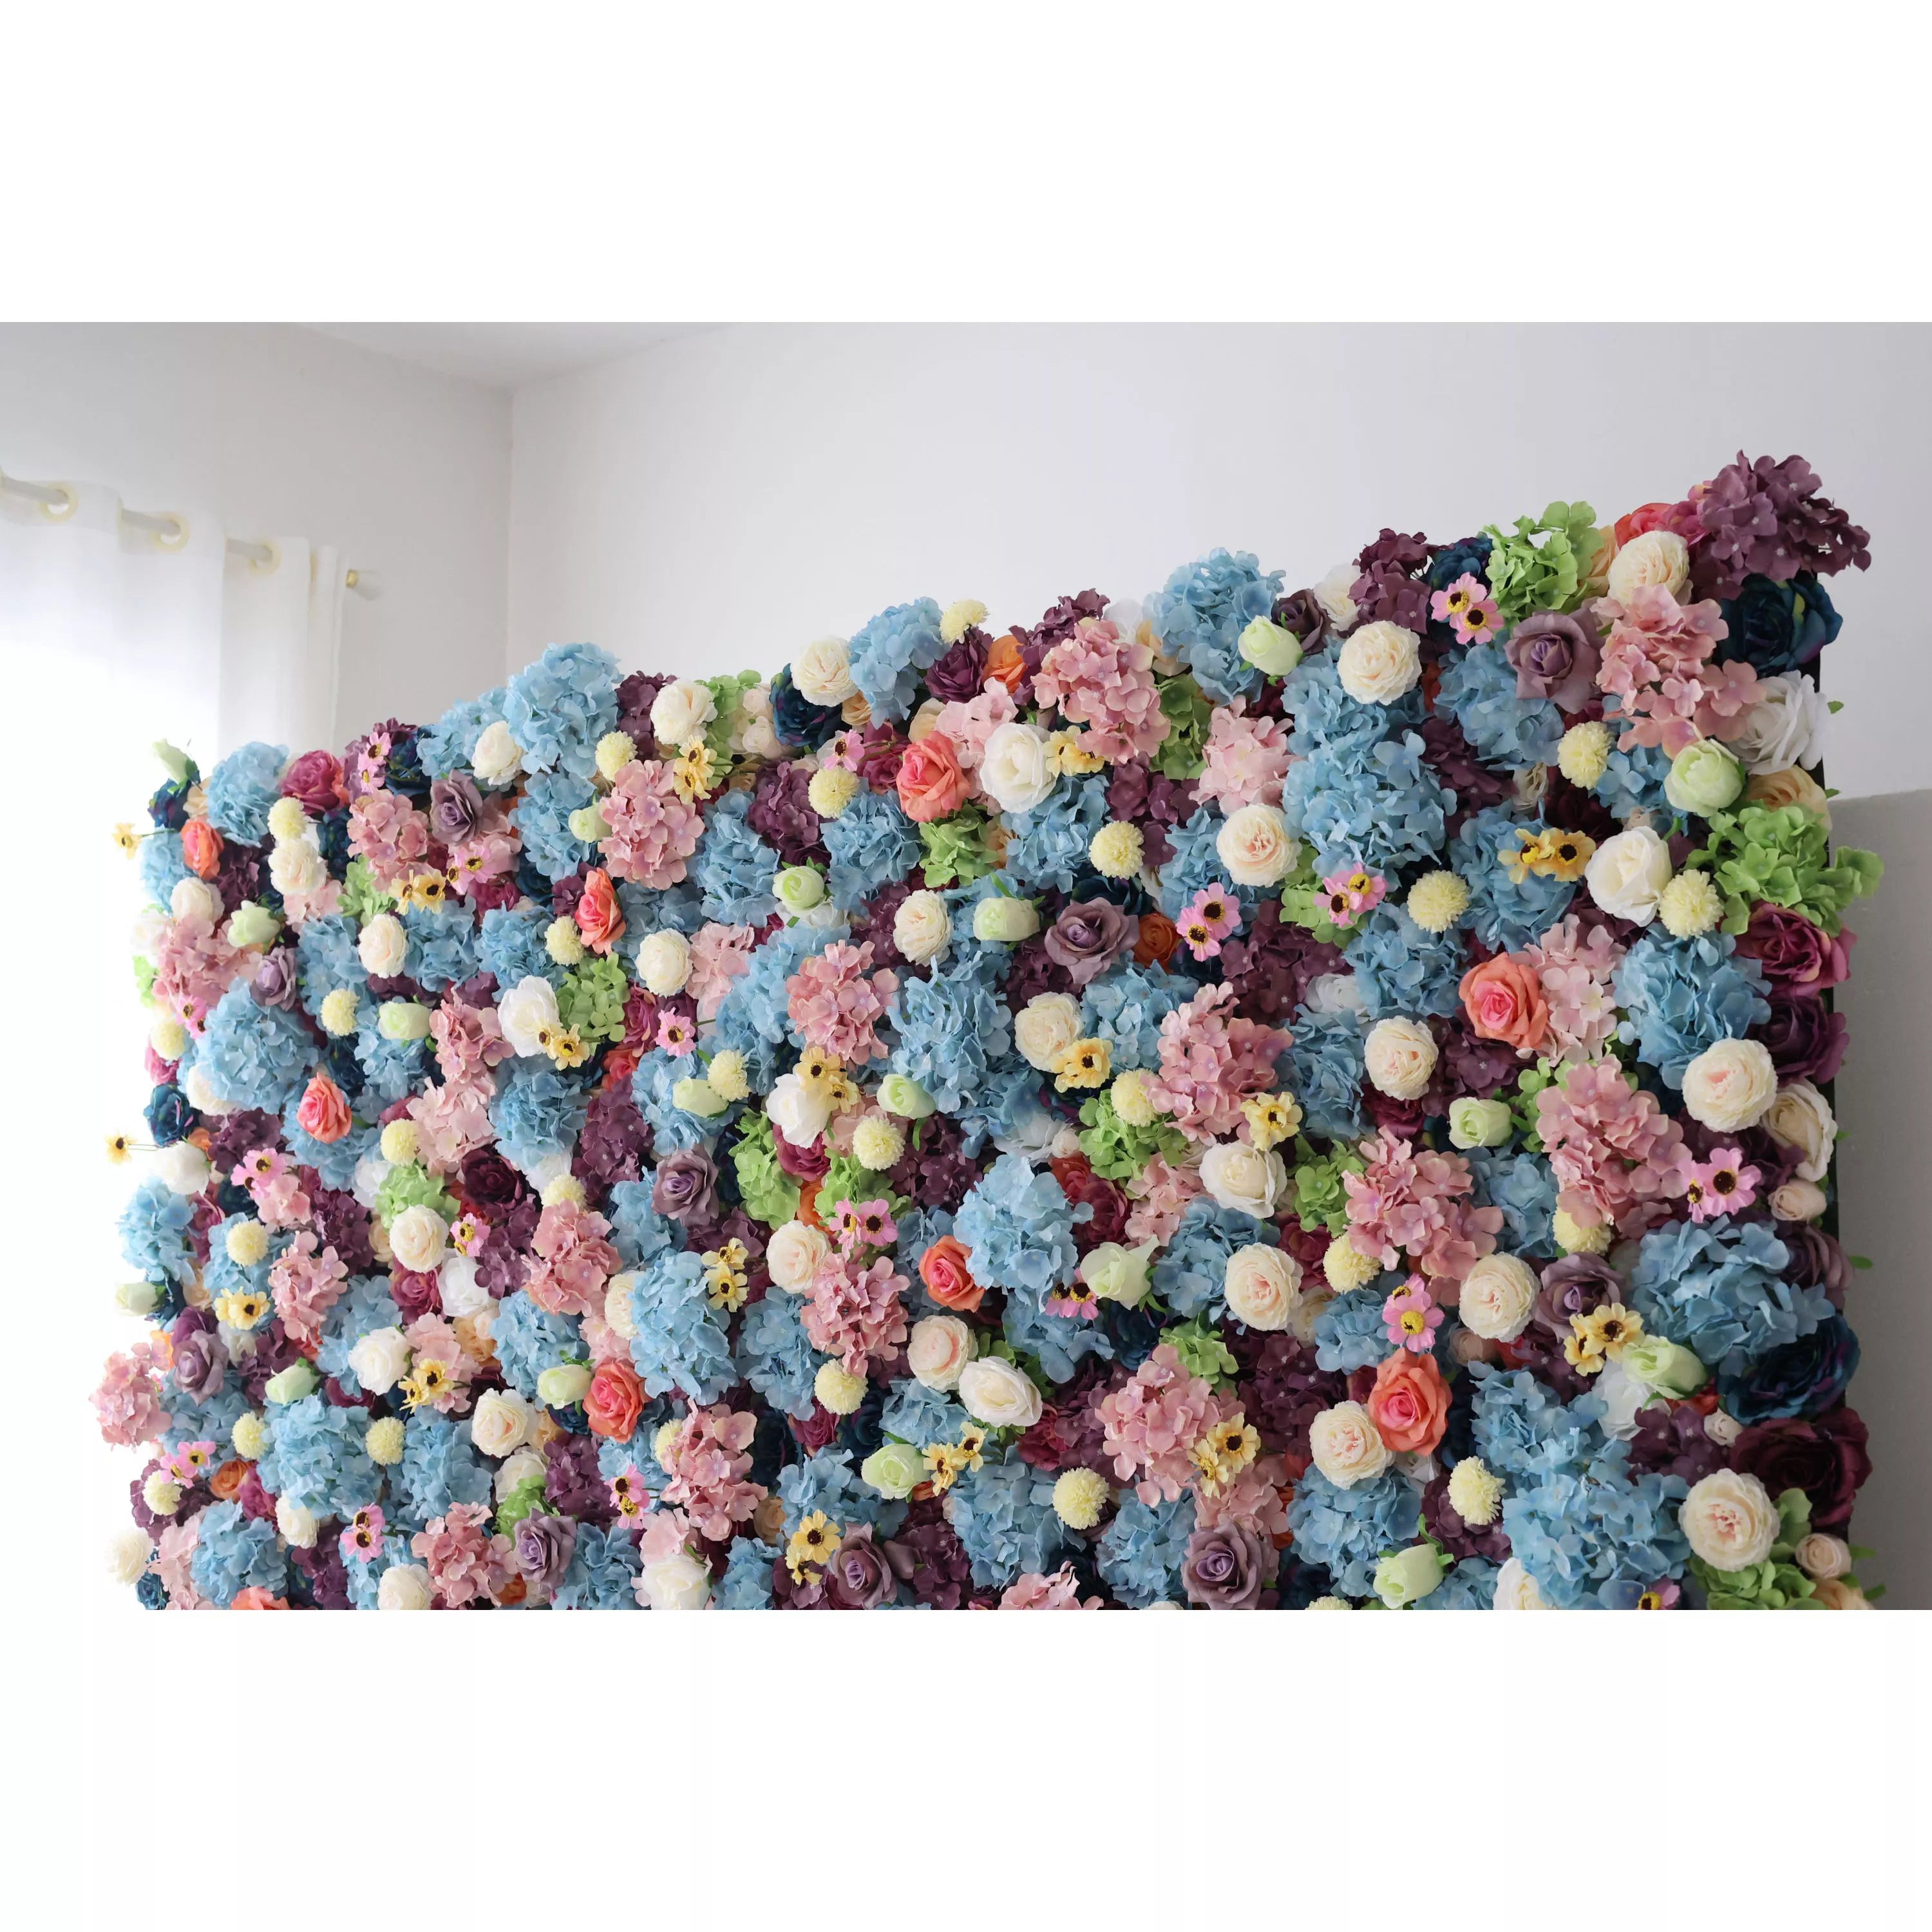 ValarFlowers Artificial Floral Wall Backdrop: Pastel Dreams - A Mesmeric Mélange of Soft Hues-VF-242